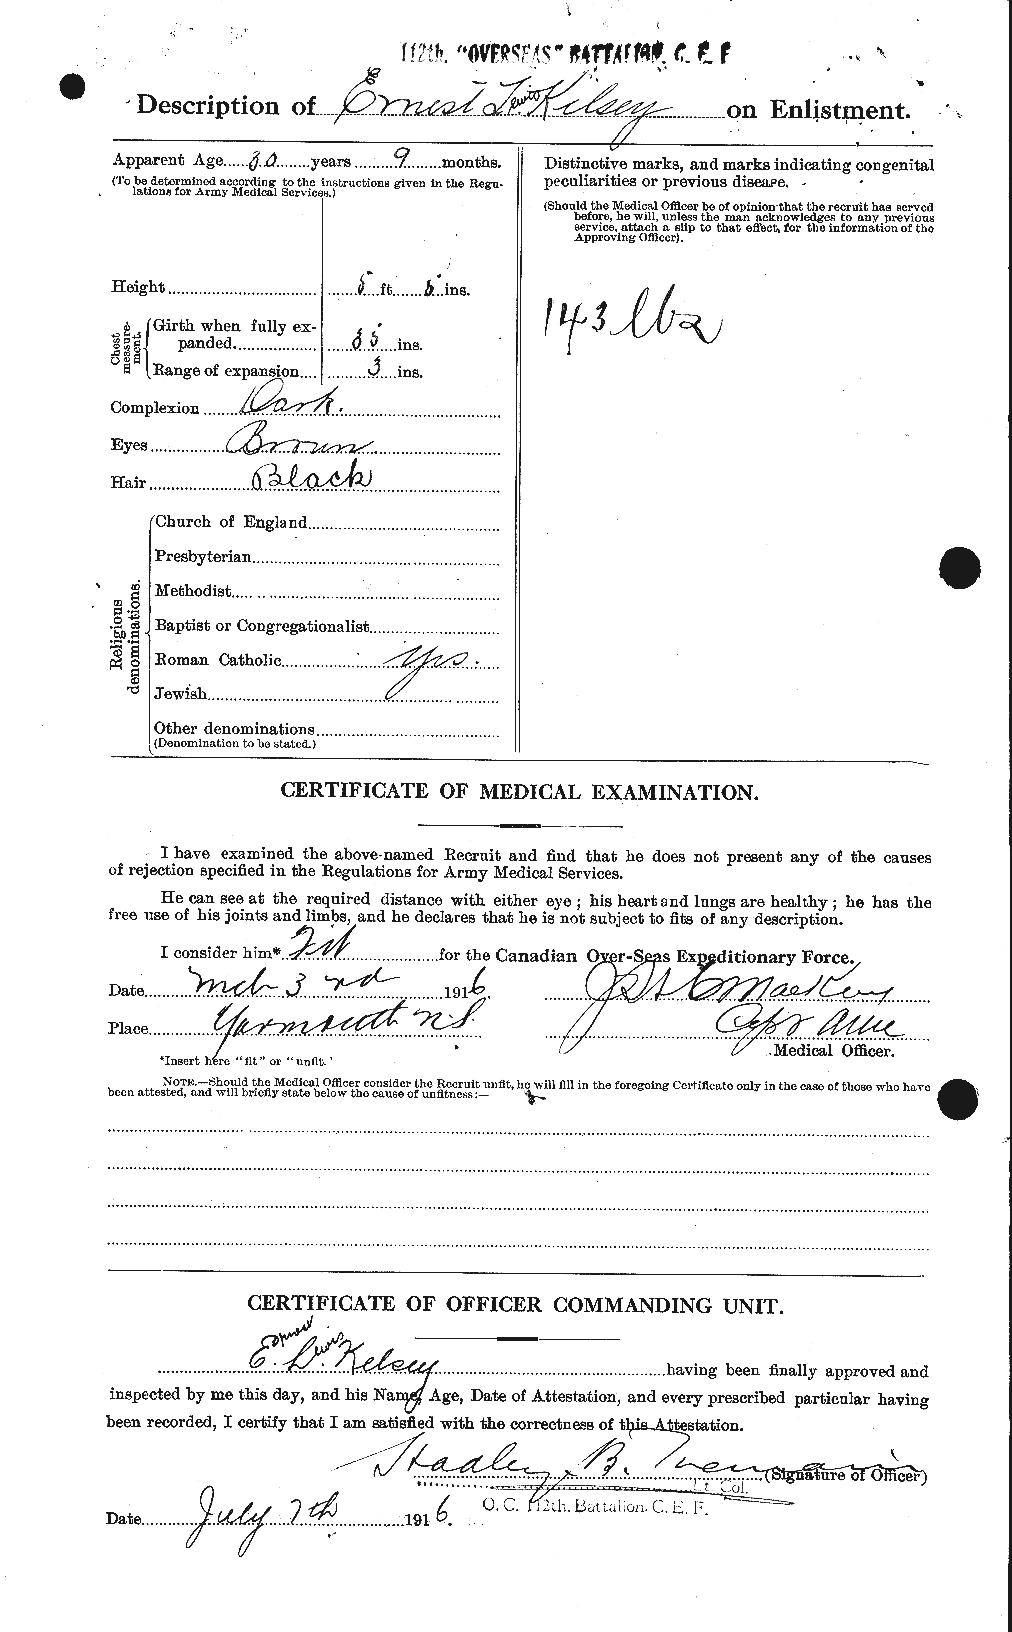 Personnel Records of the First World War - CEF 429927b